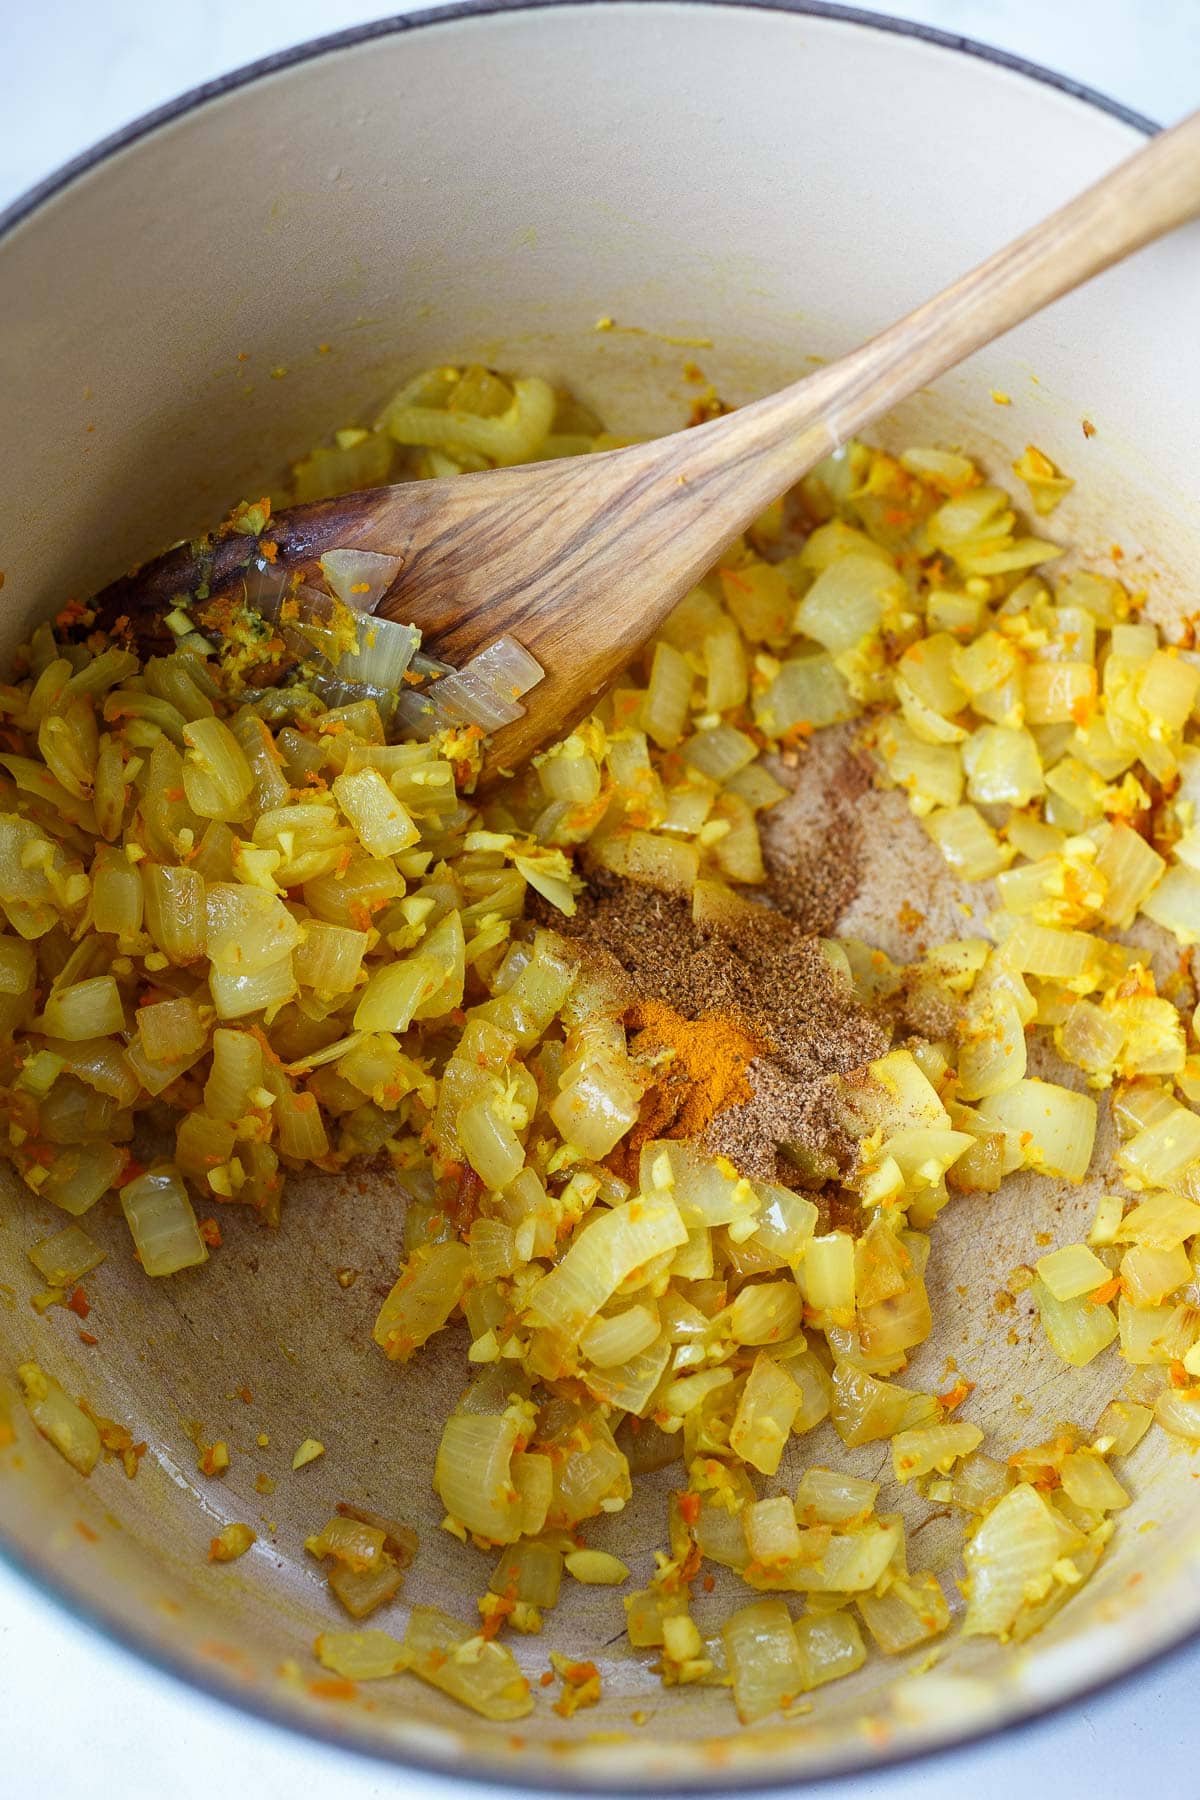 diced onion and grated ginger and turmeric with spices stirred in soup pot with wooden spoon.